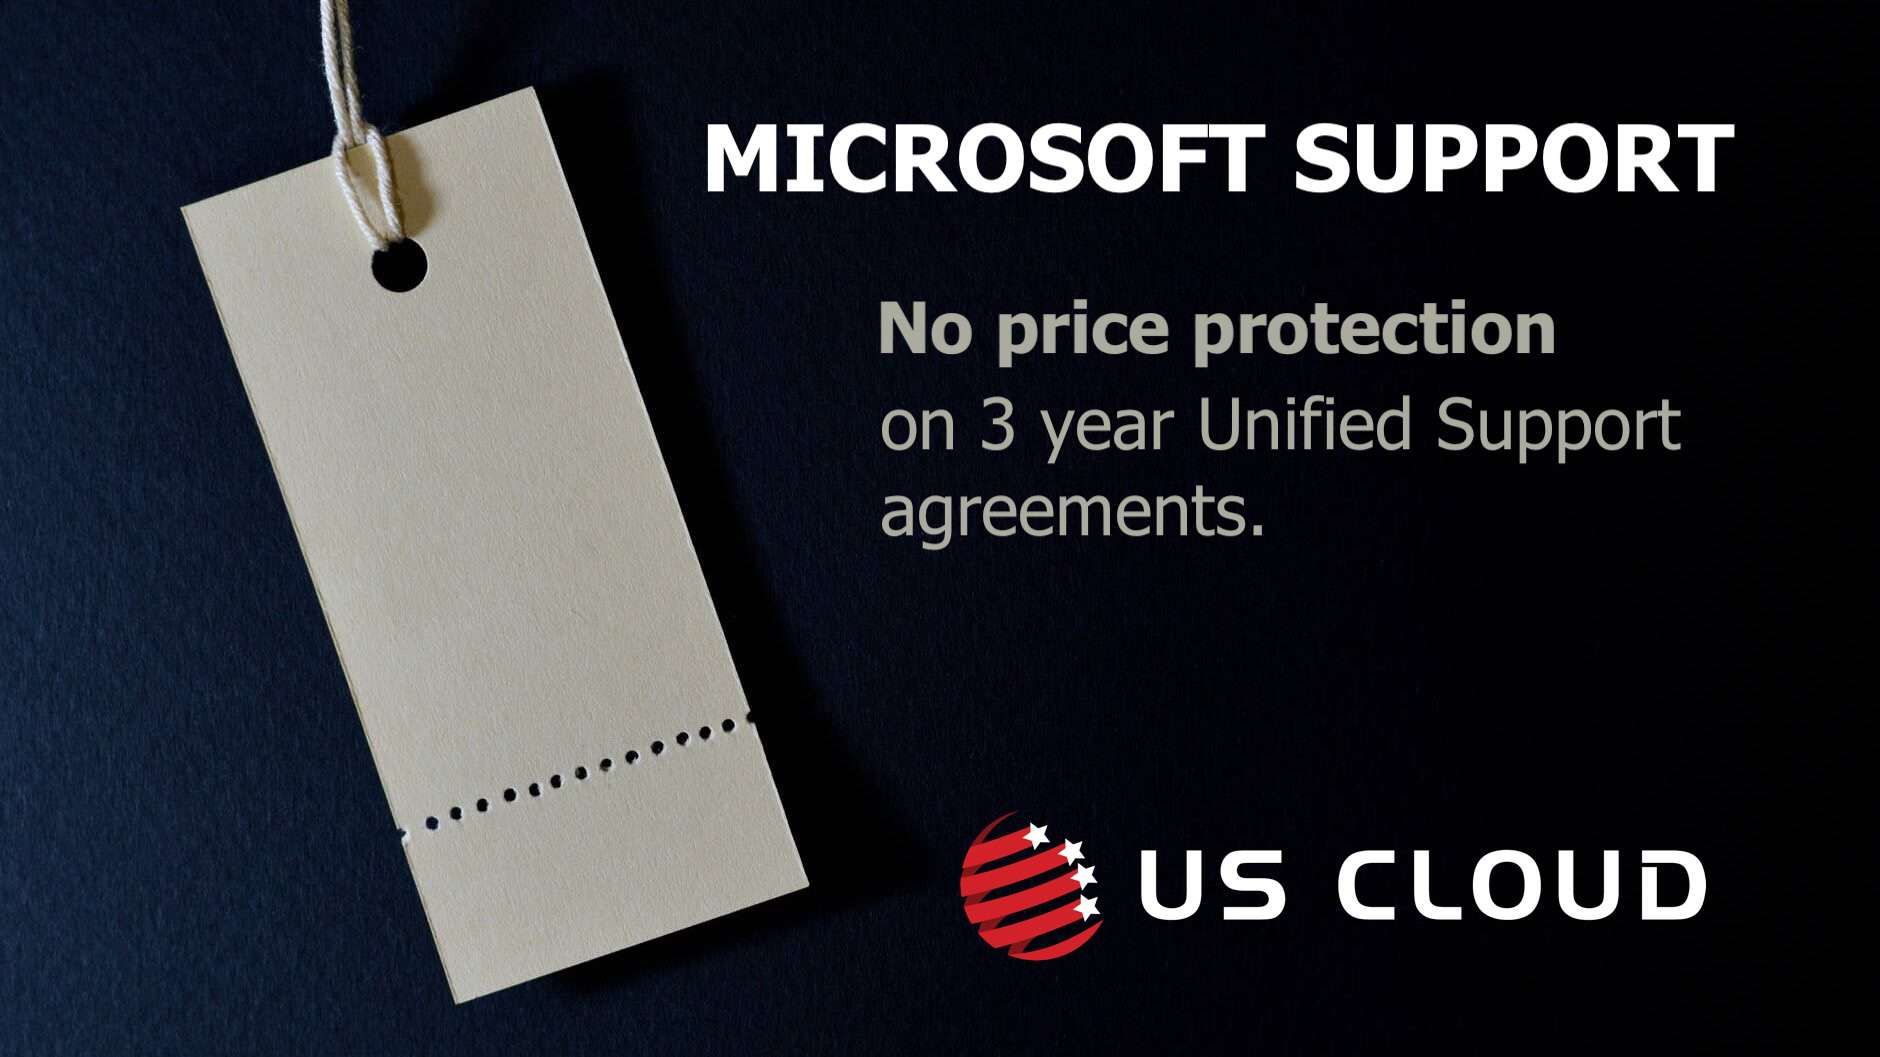 No price-protection on 3 year Microsoft Unified Support agreements